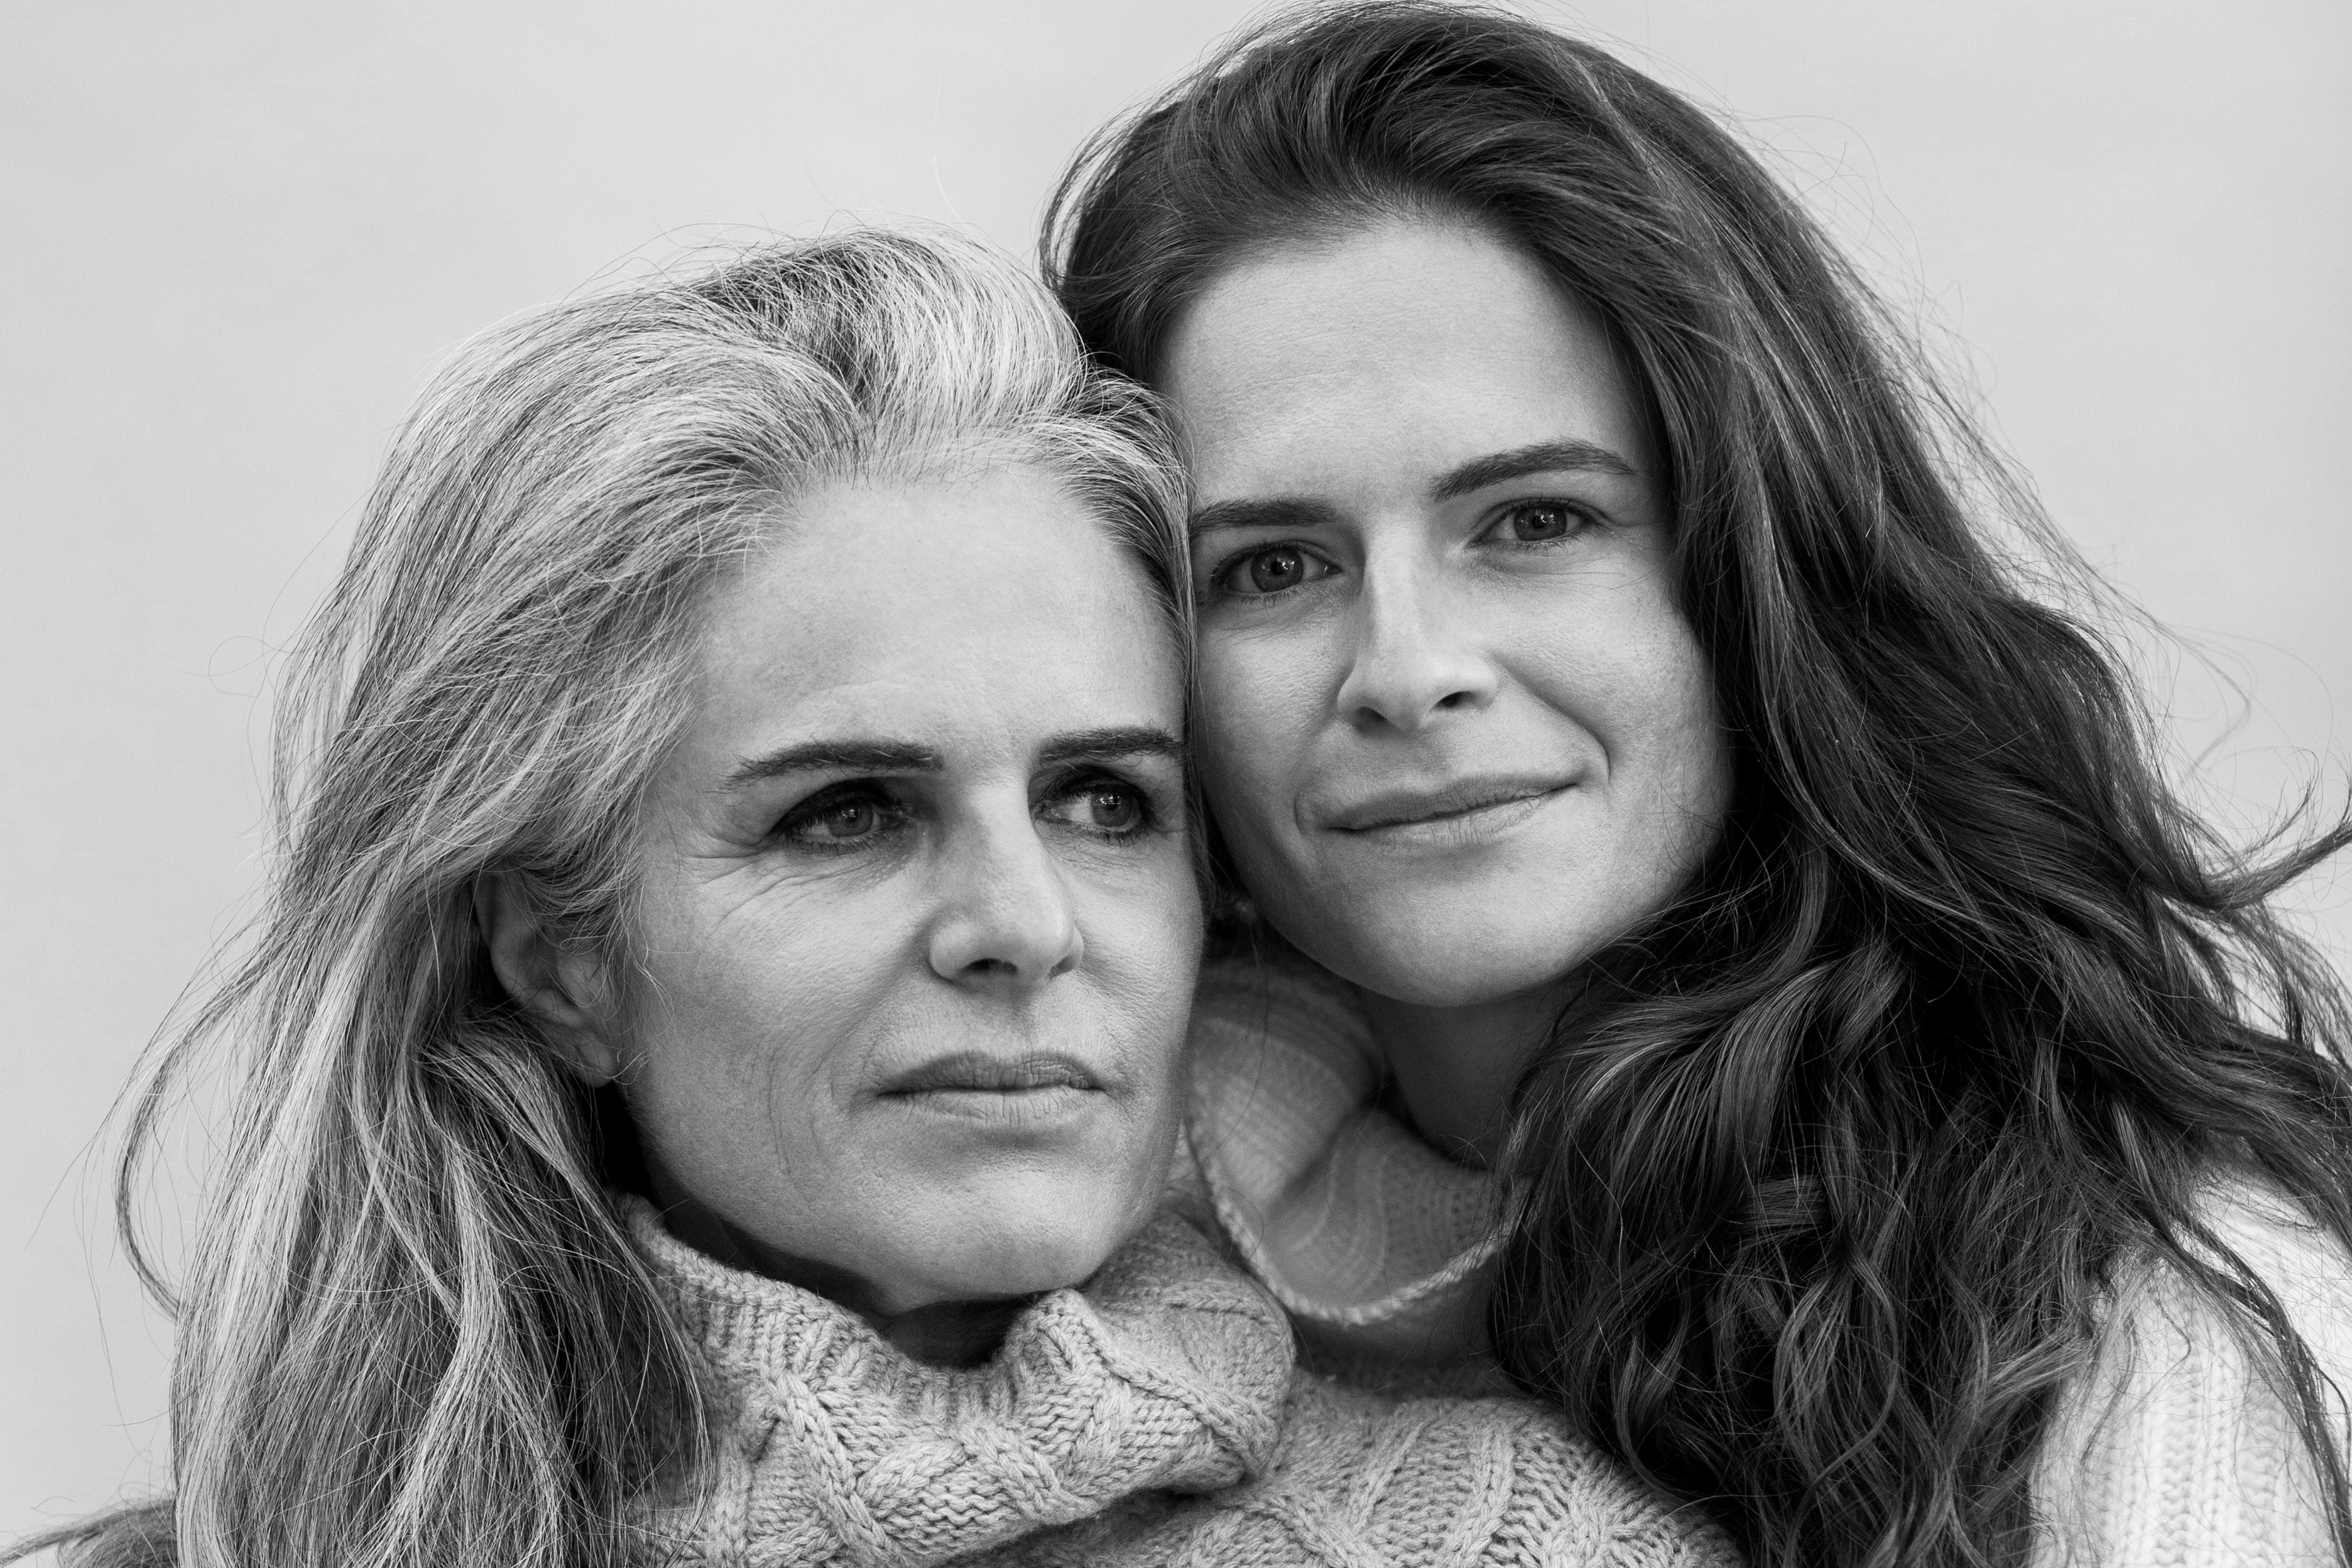 Monochrome portrait of a mother and daughter close together, wearing warm knits, sharing a bond